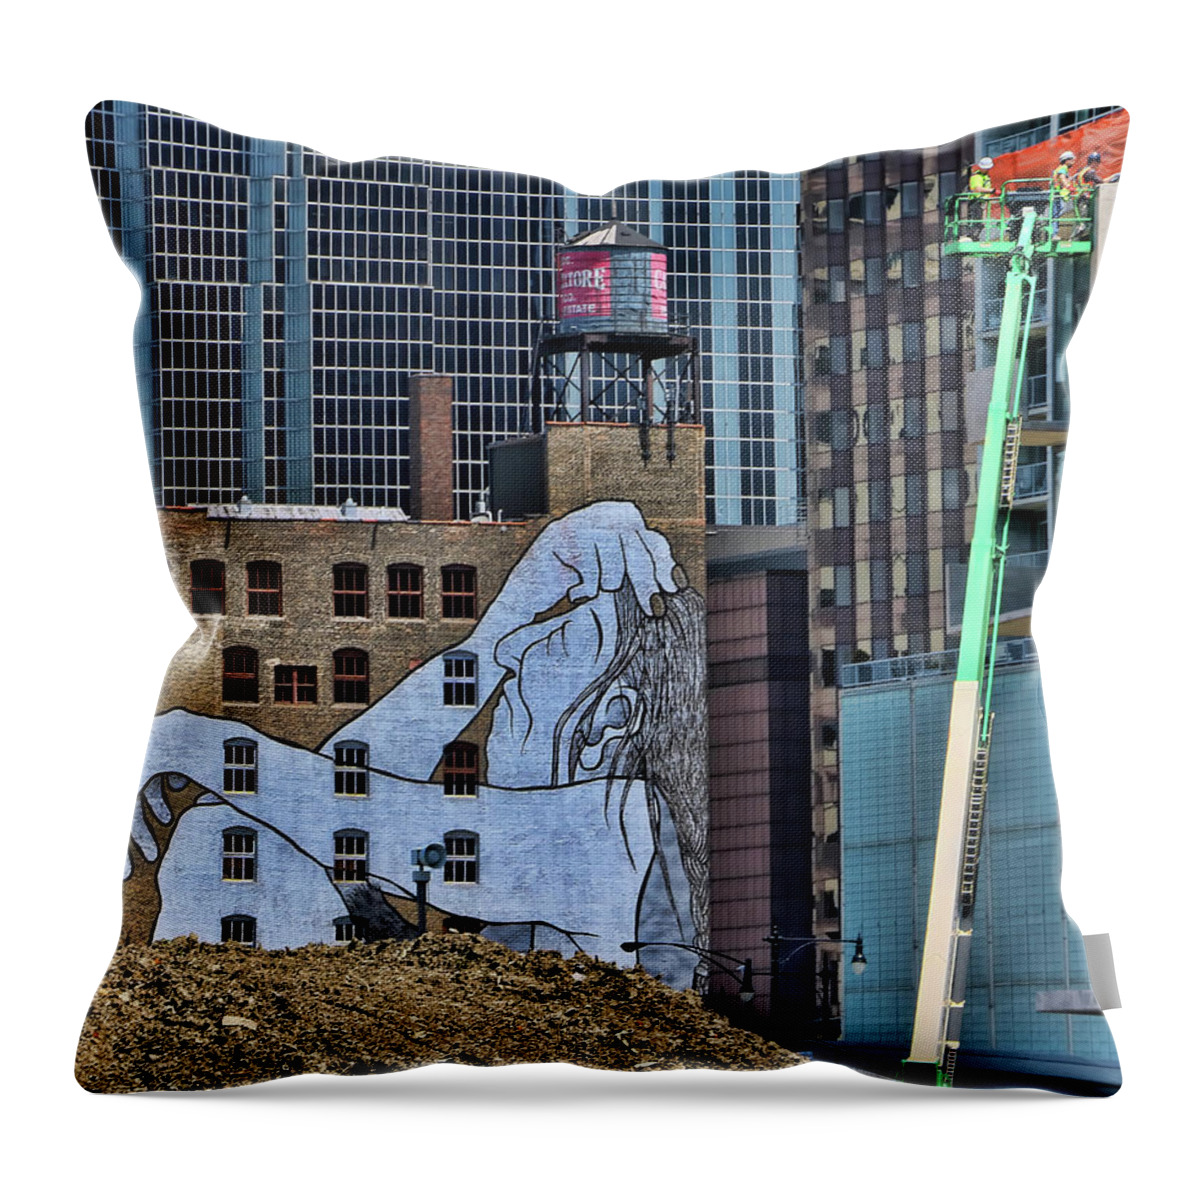 Mural Throw Pillow featuring the photograph Lost Soul Mural - Chicago by Allen Beatty